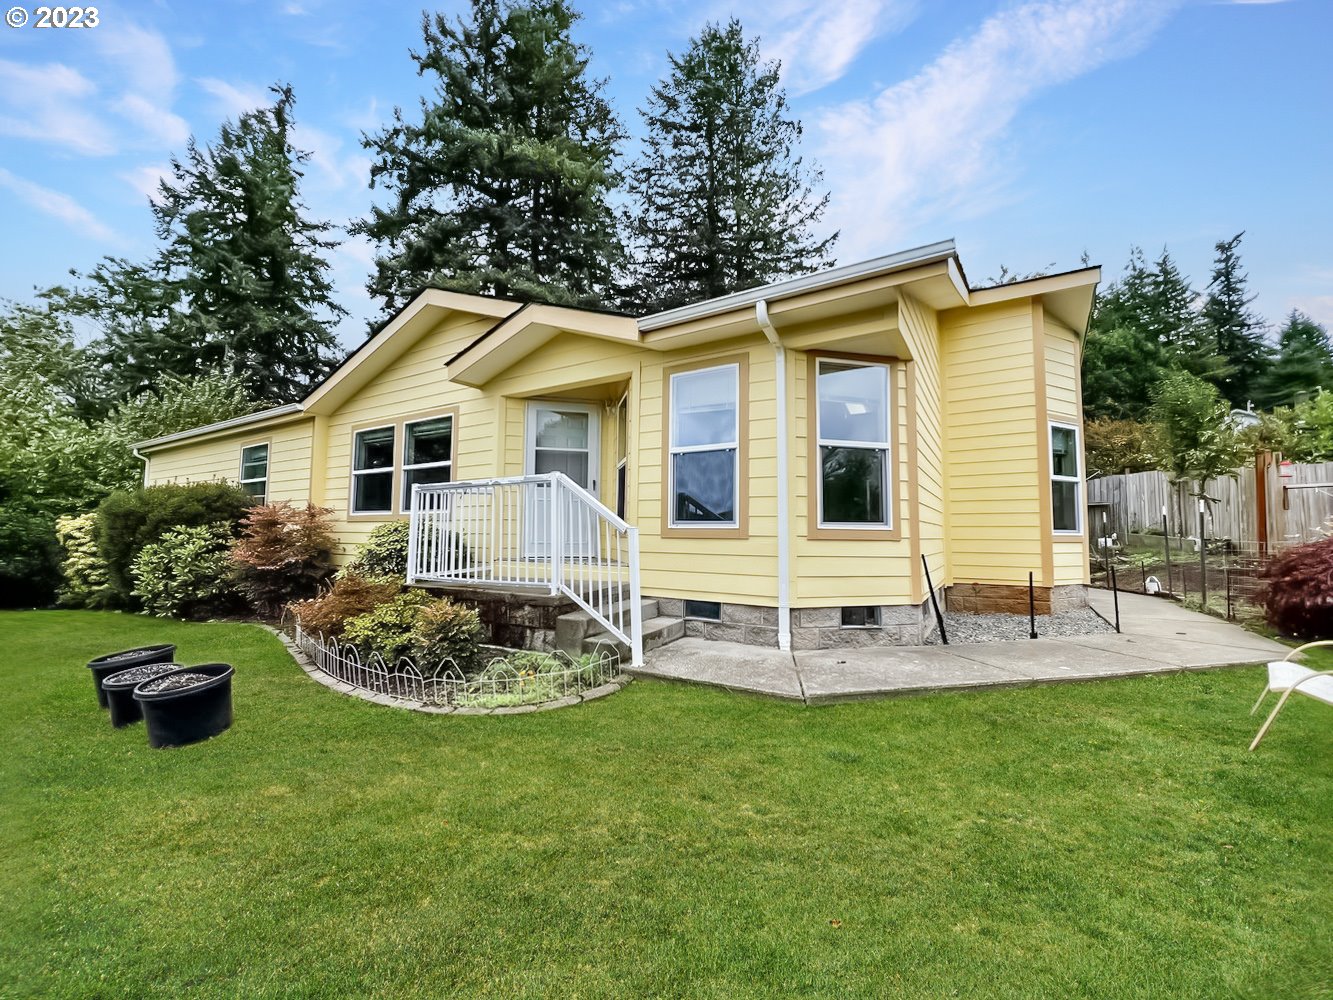 794 E 11TH PL, Coquille, OR 